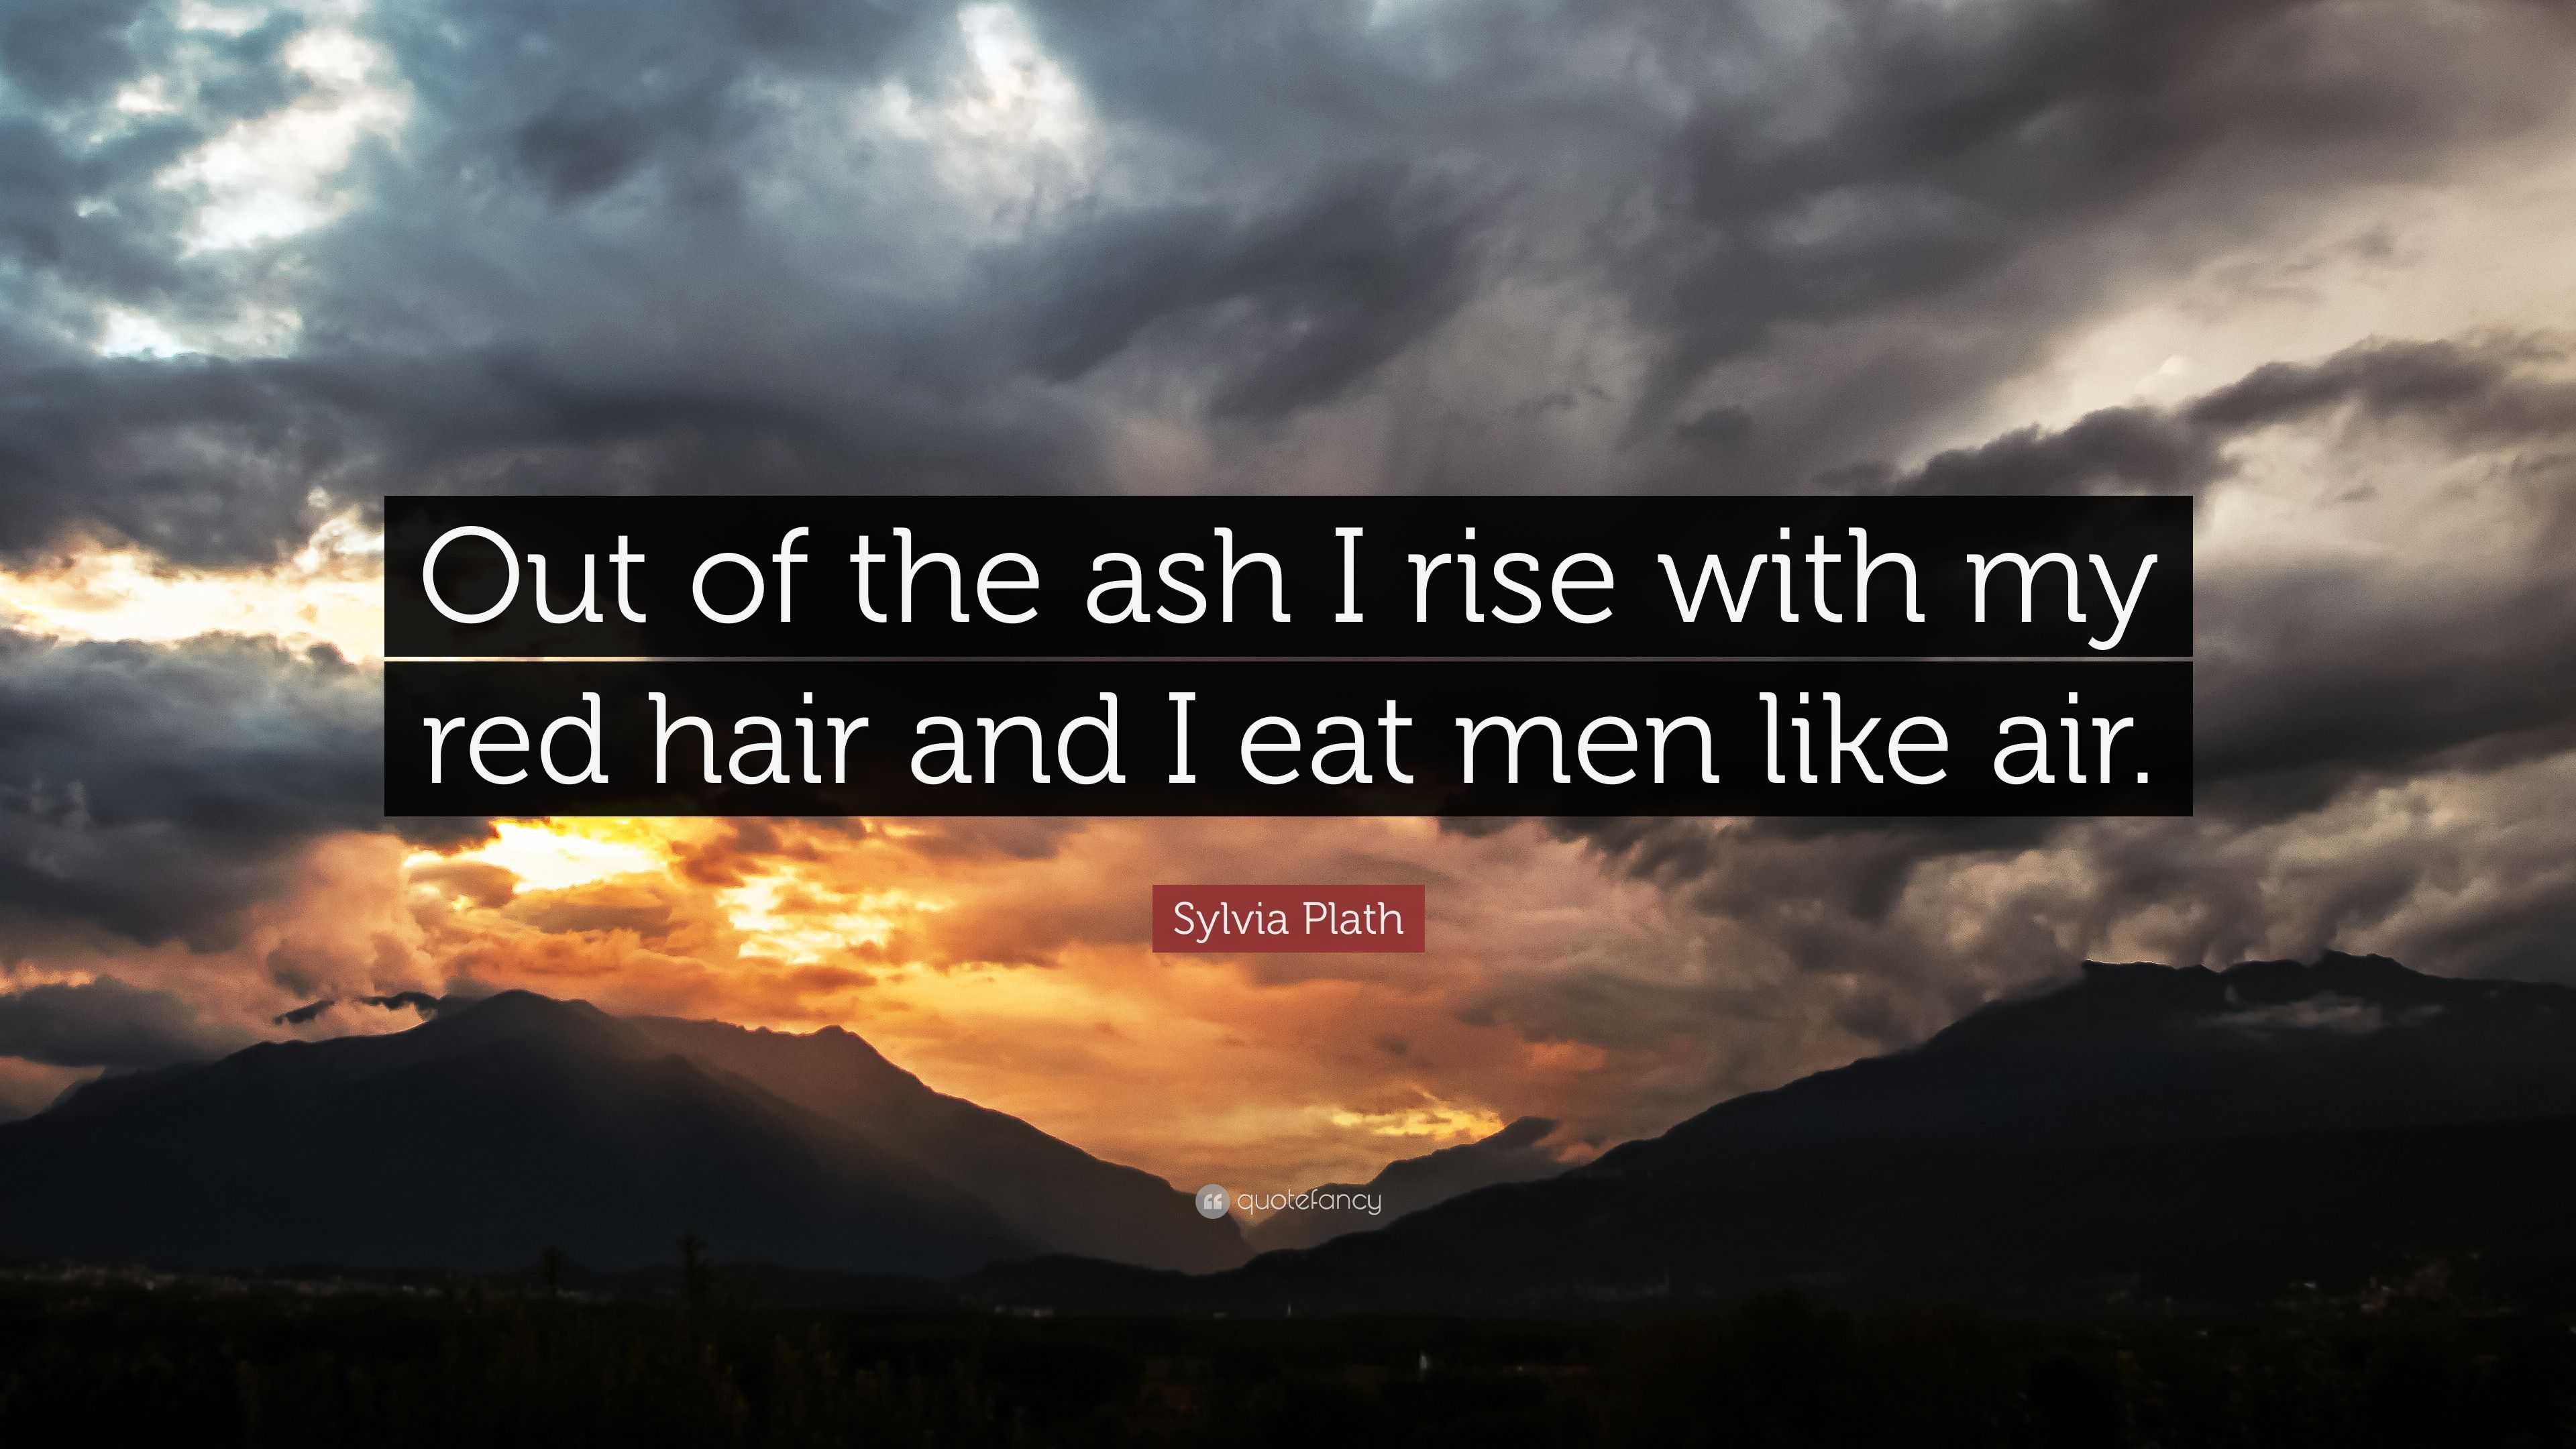 Sylvia Plath Quote “Out of the ash I rise with my red hair and